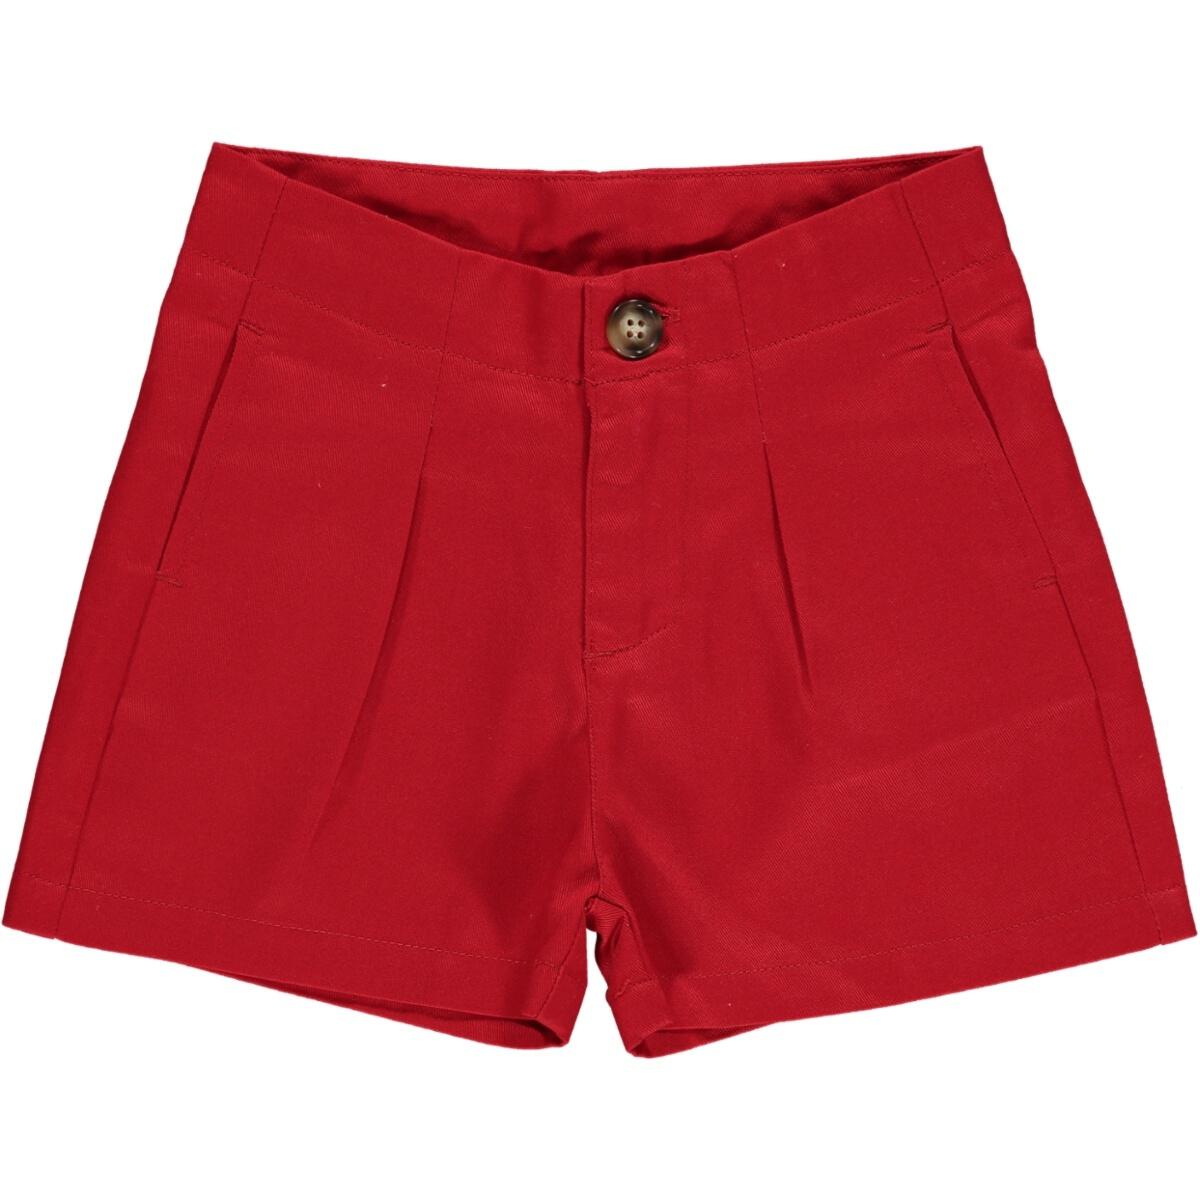 Candy Apple Red Shorts